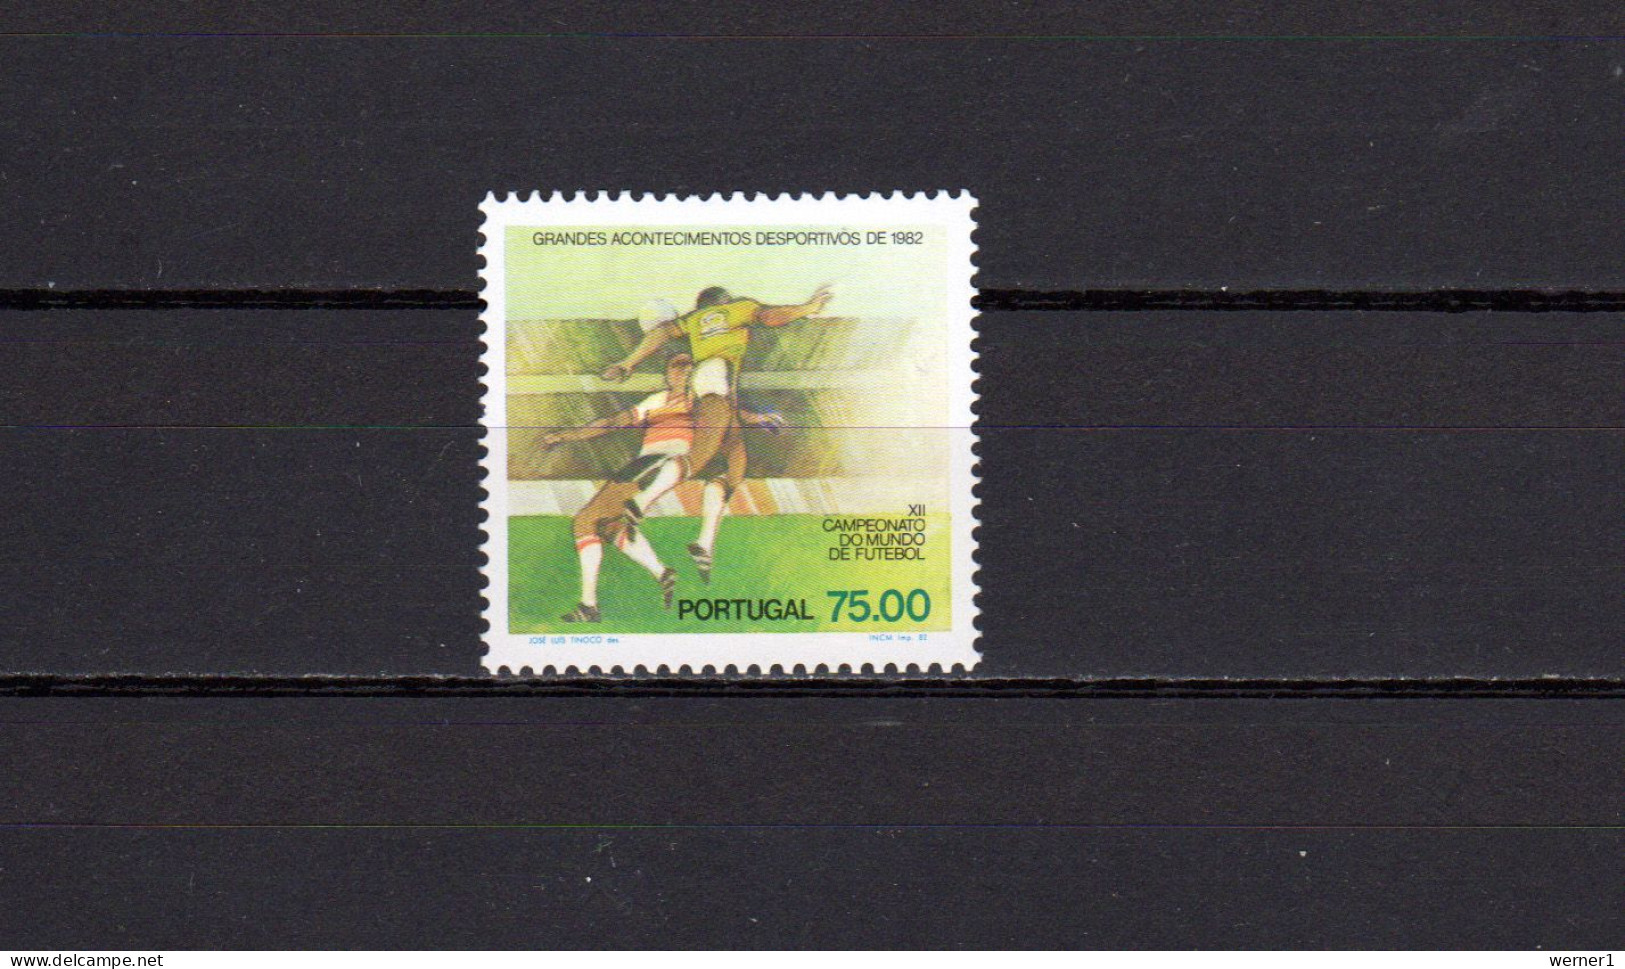 Portugal 1982 Football Soccer World Cup Stamp MNH - 1982 – Spain